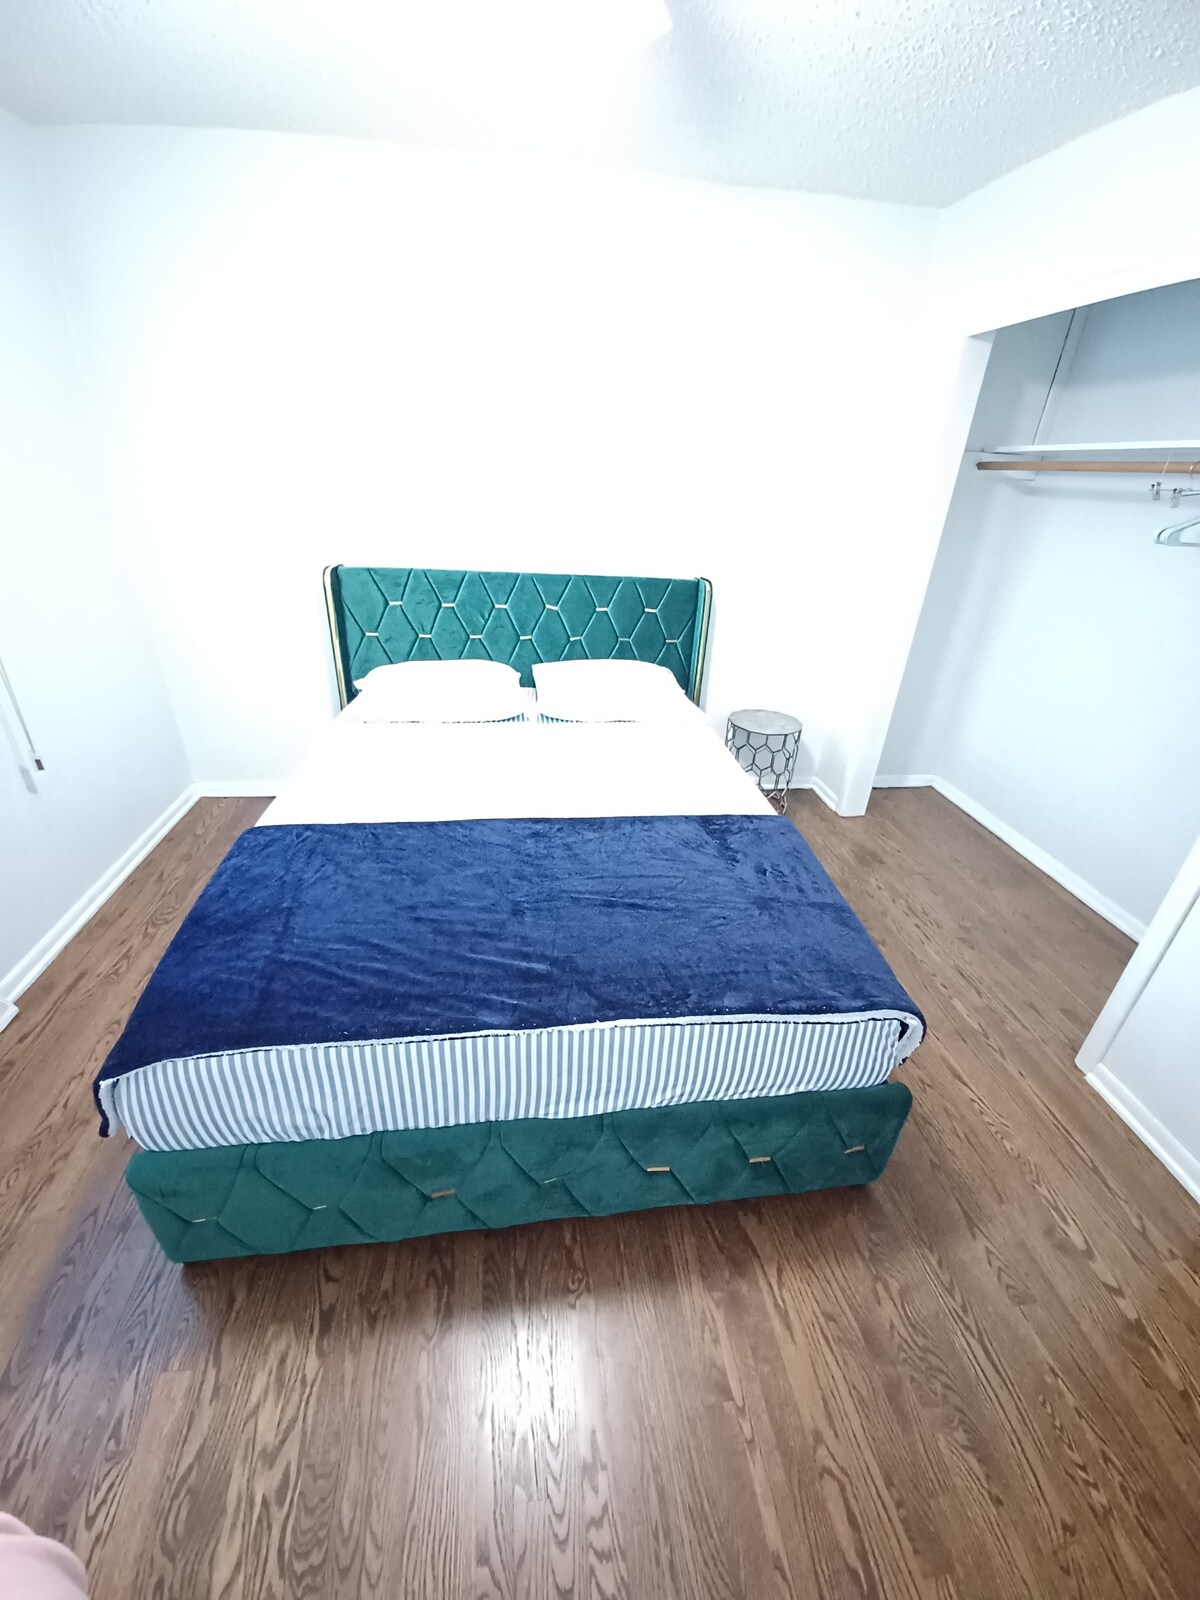 #2 Clean bed at an affordable price